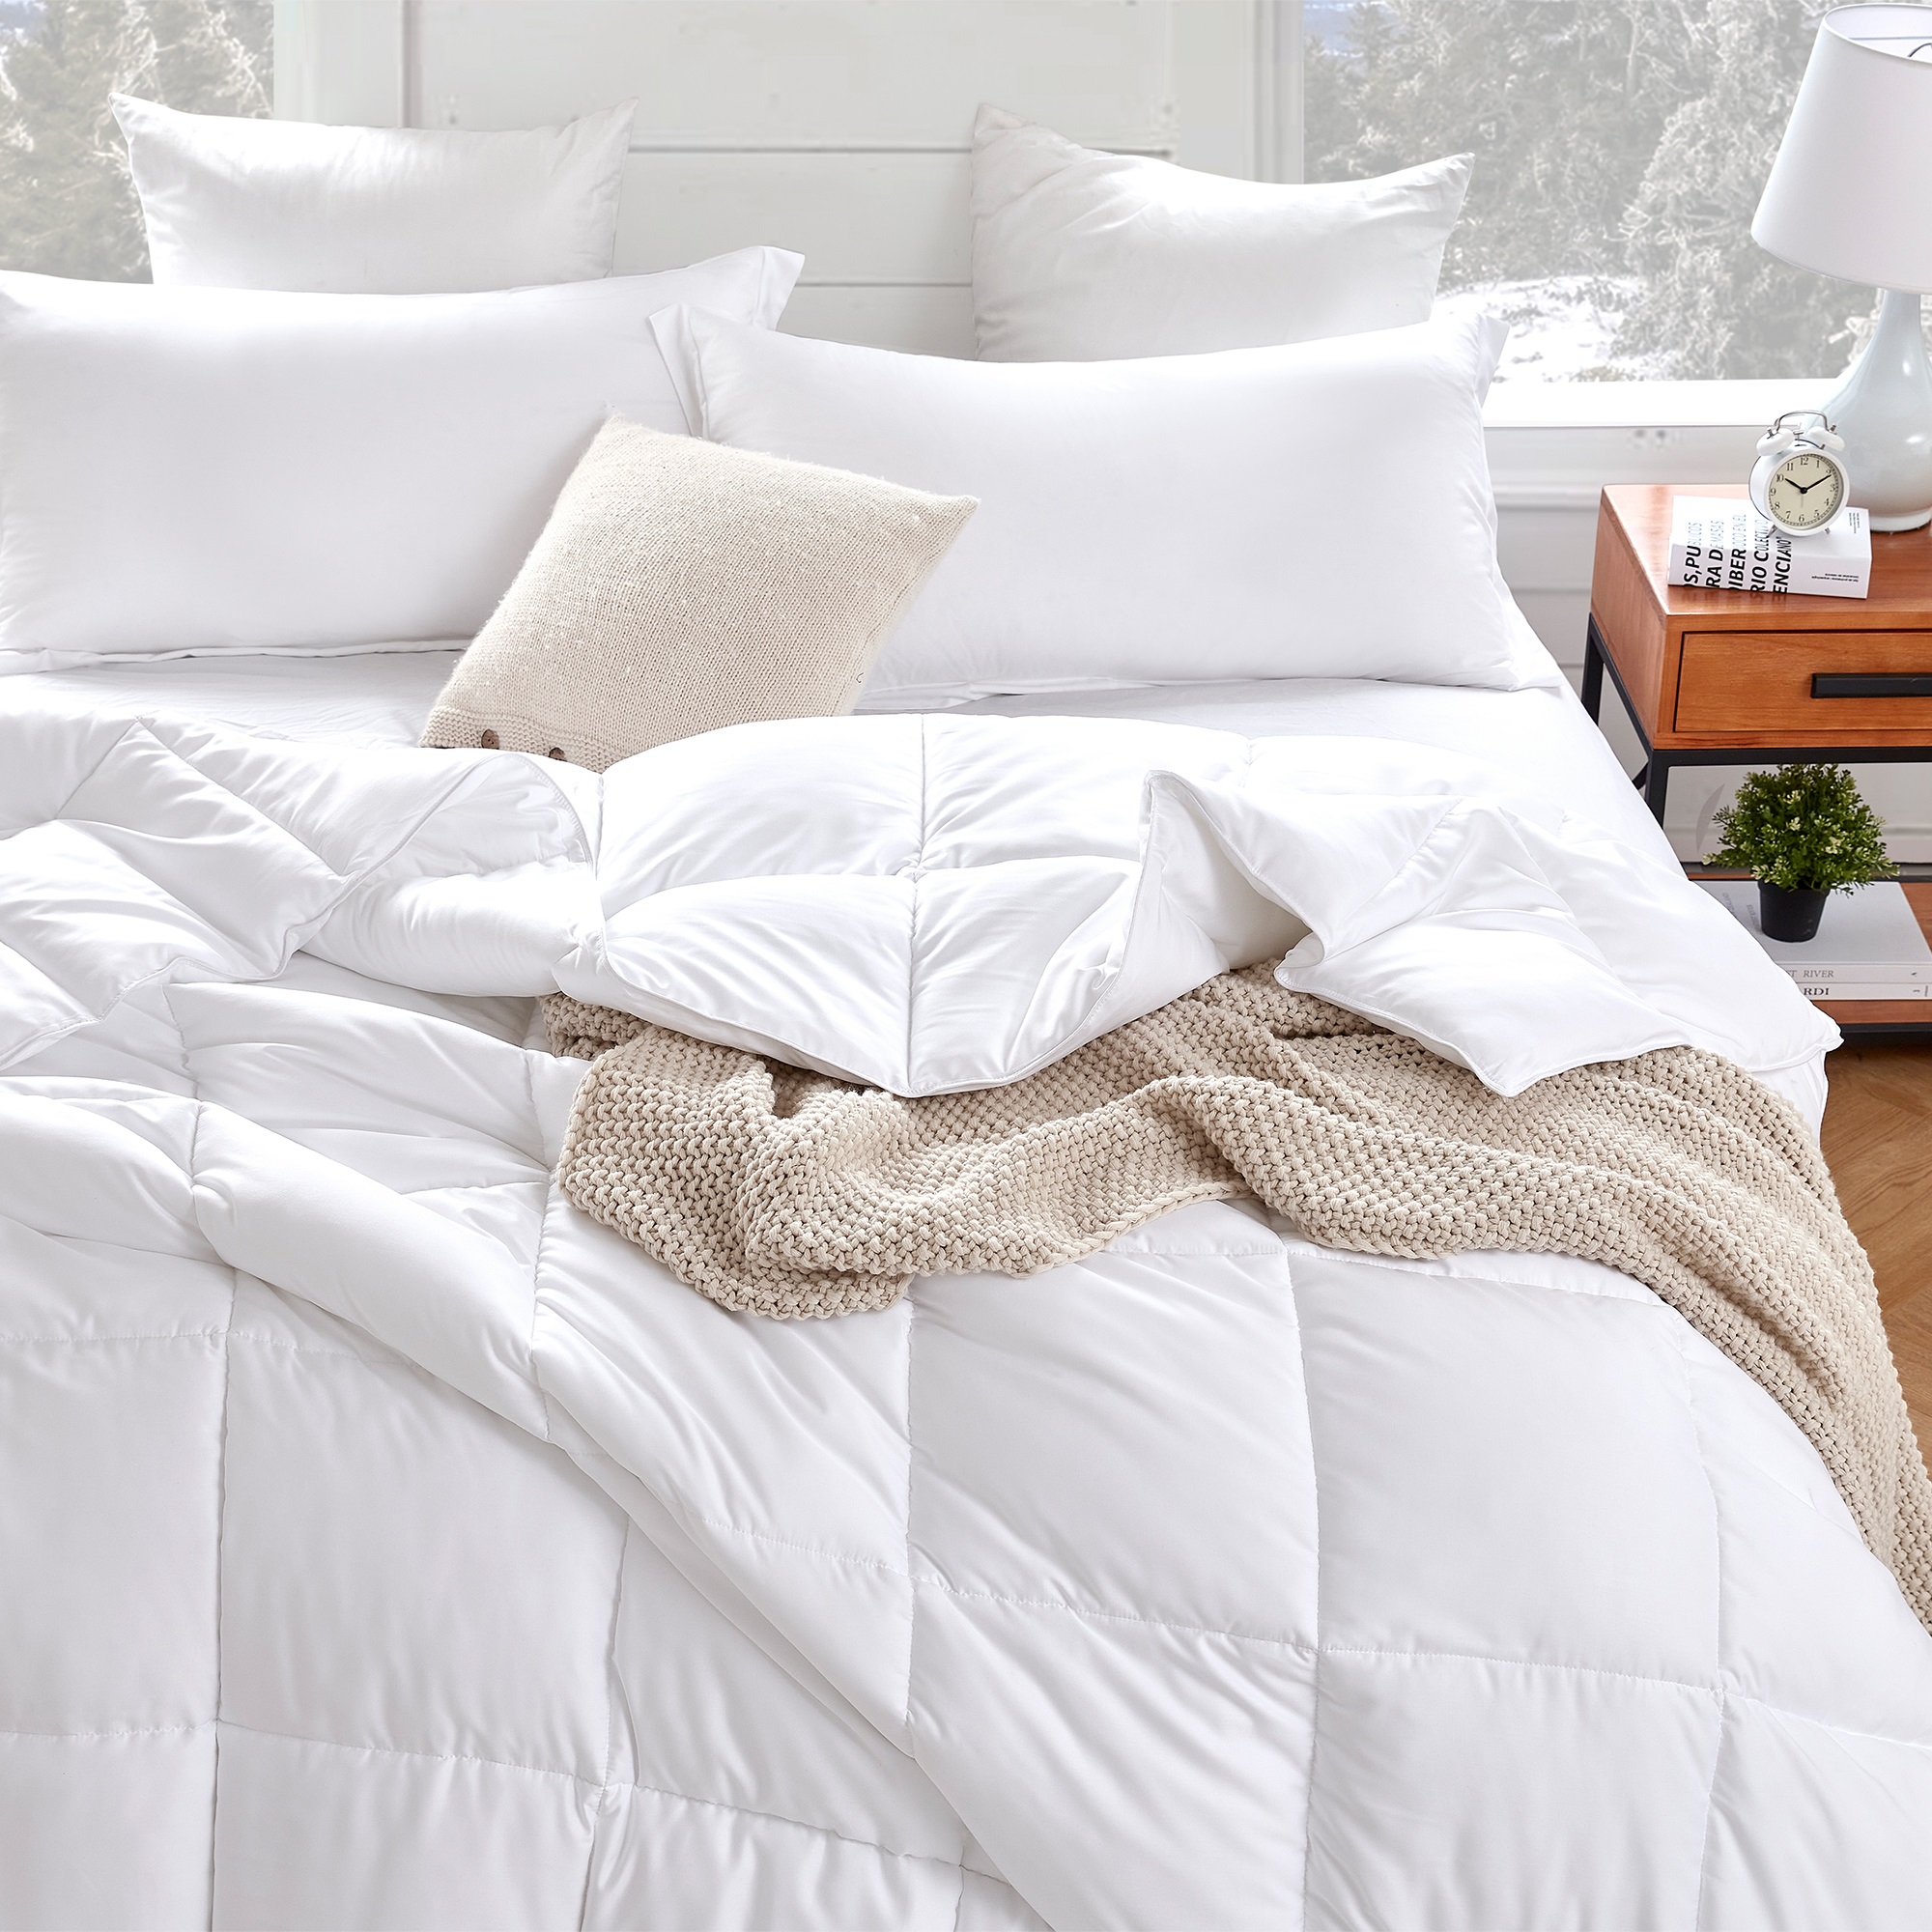 Snorze Cloud Comforter - Coma Inducer Ultra Cozy Bamboo - Oversized Comforter in White